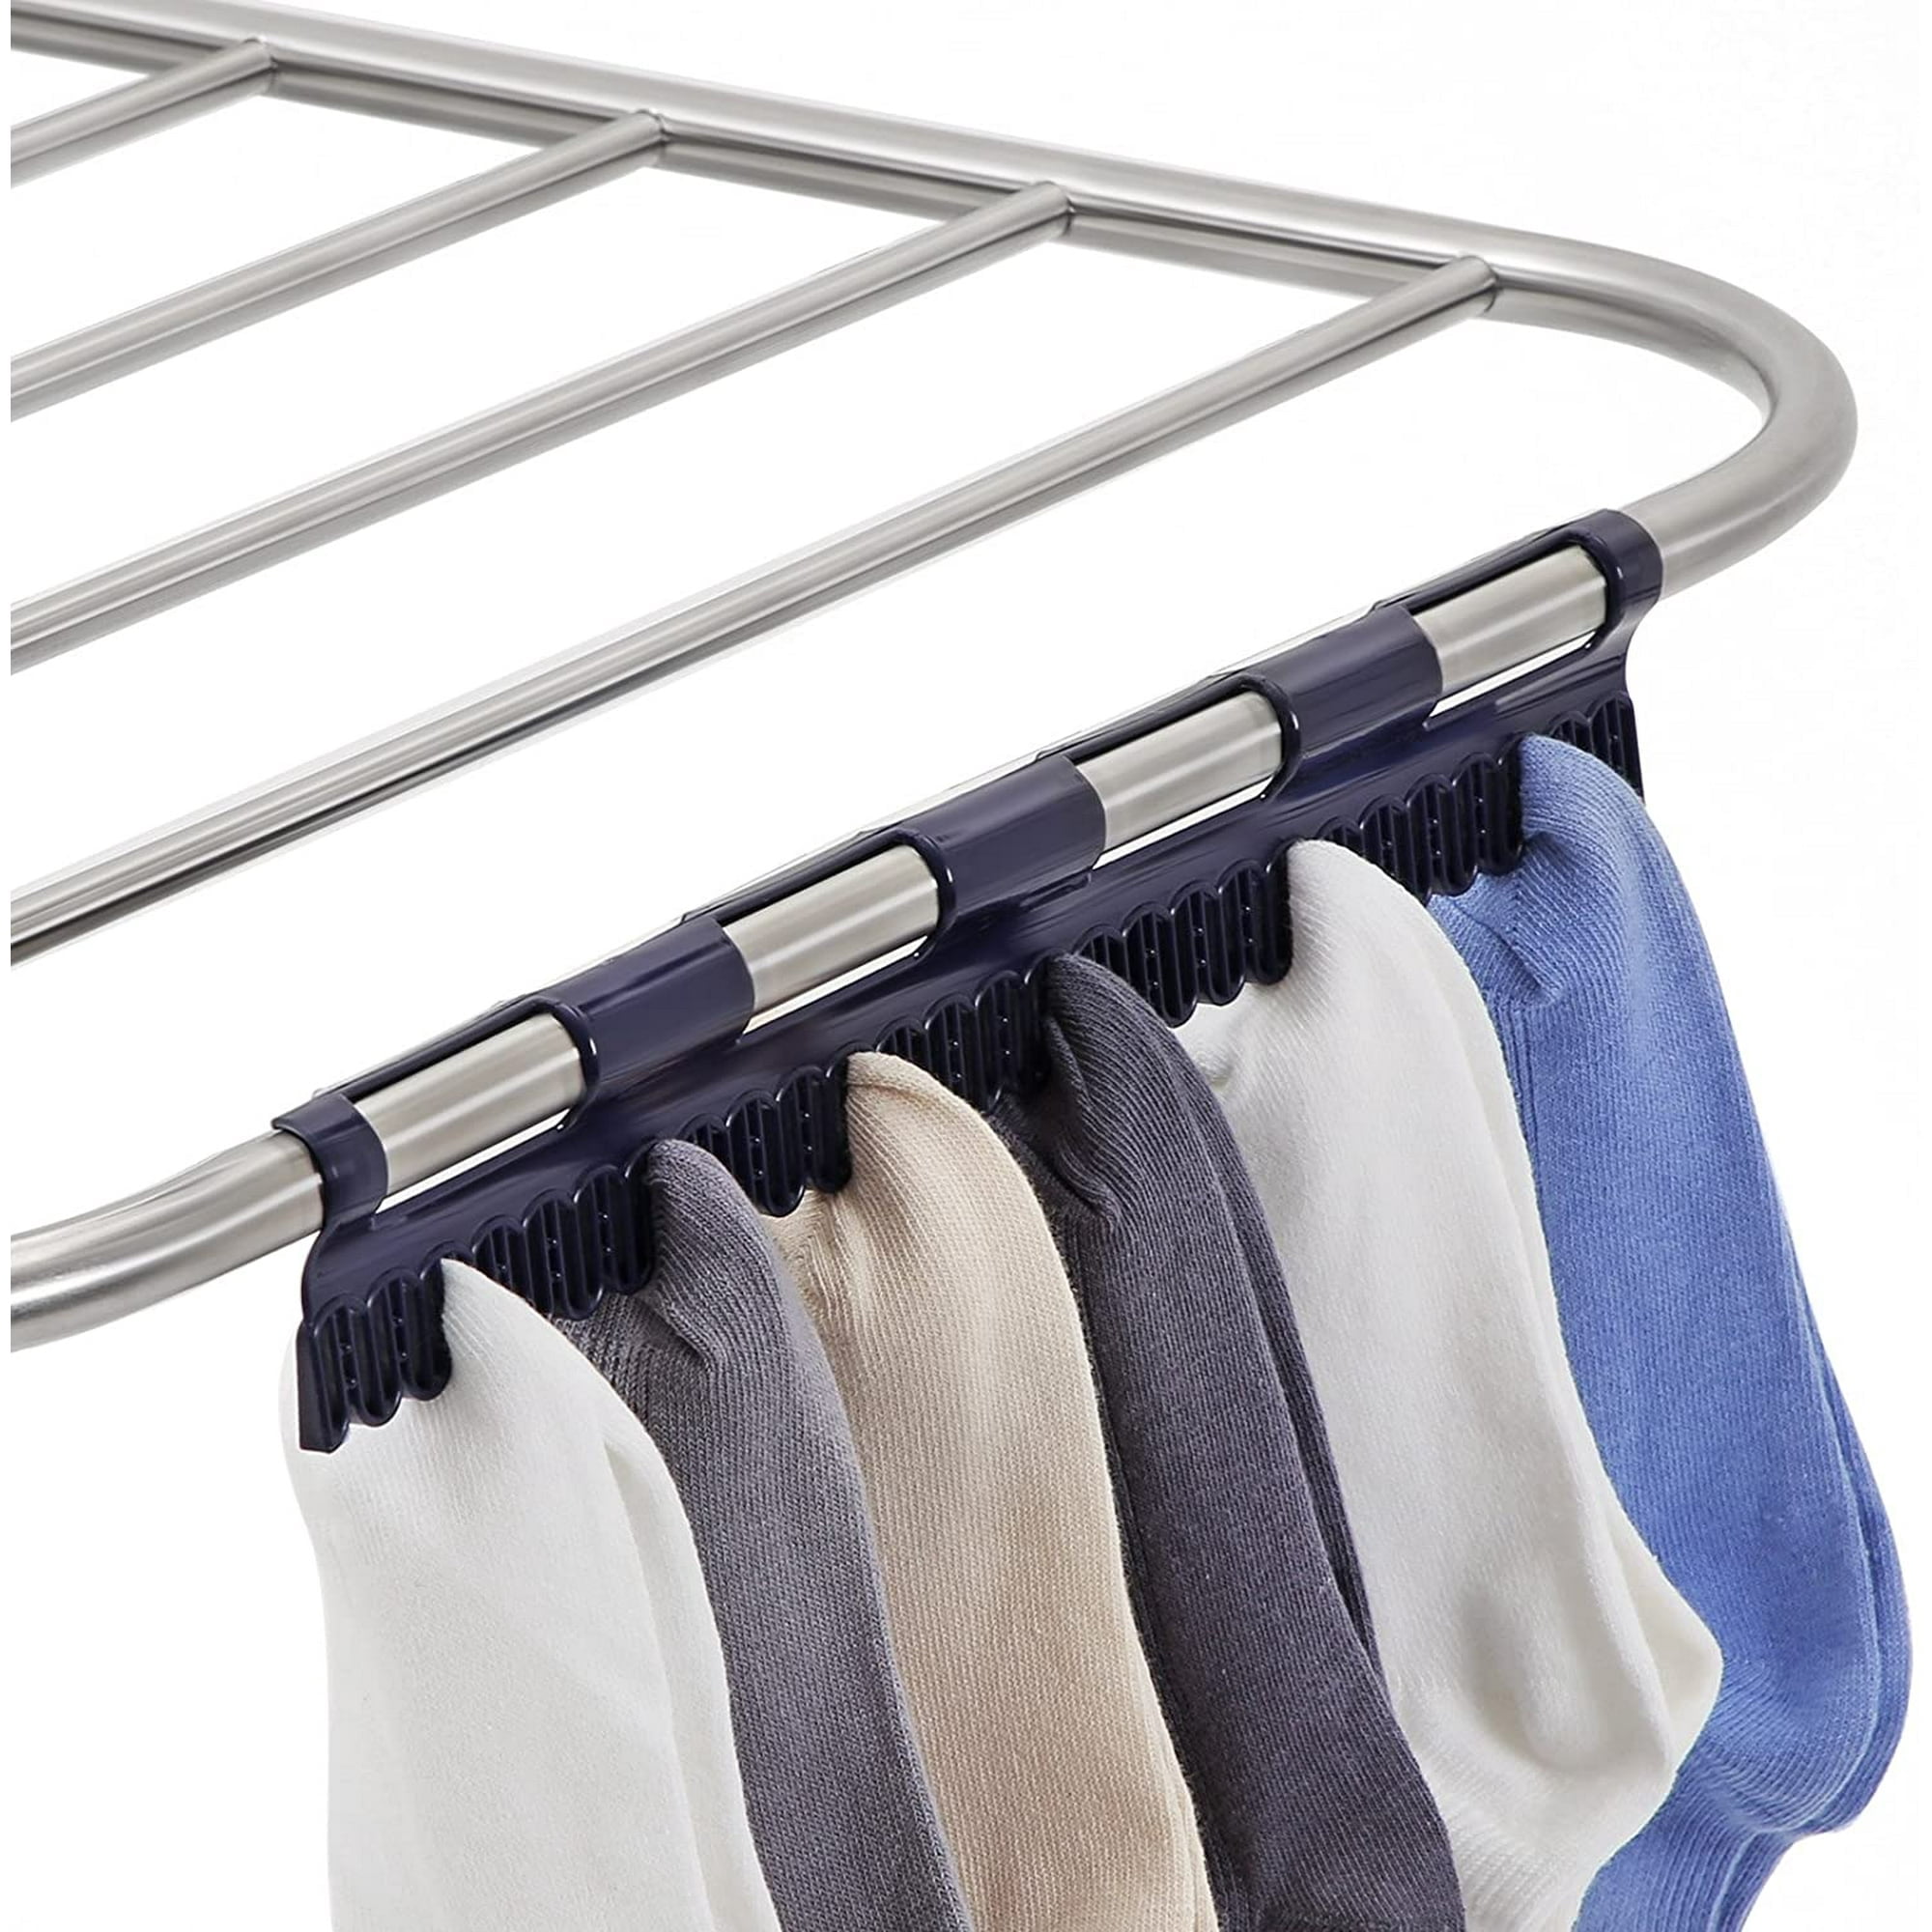 Sancusto Electric Clothes Dryer, Portable Clothes Drying Rack